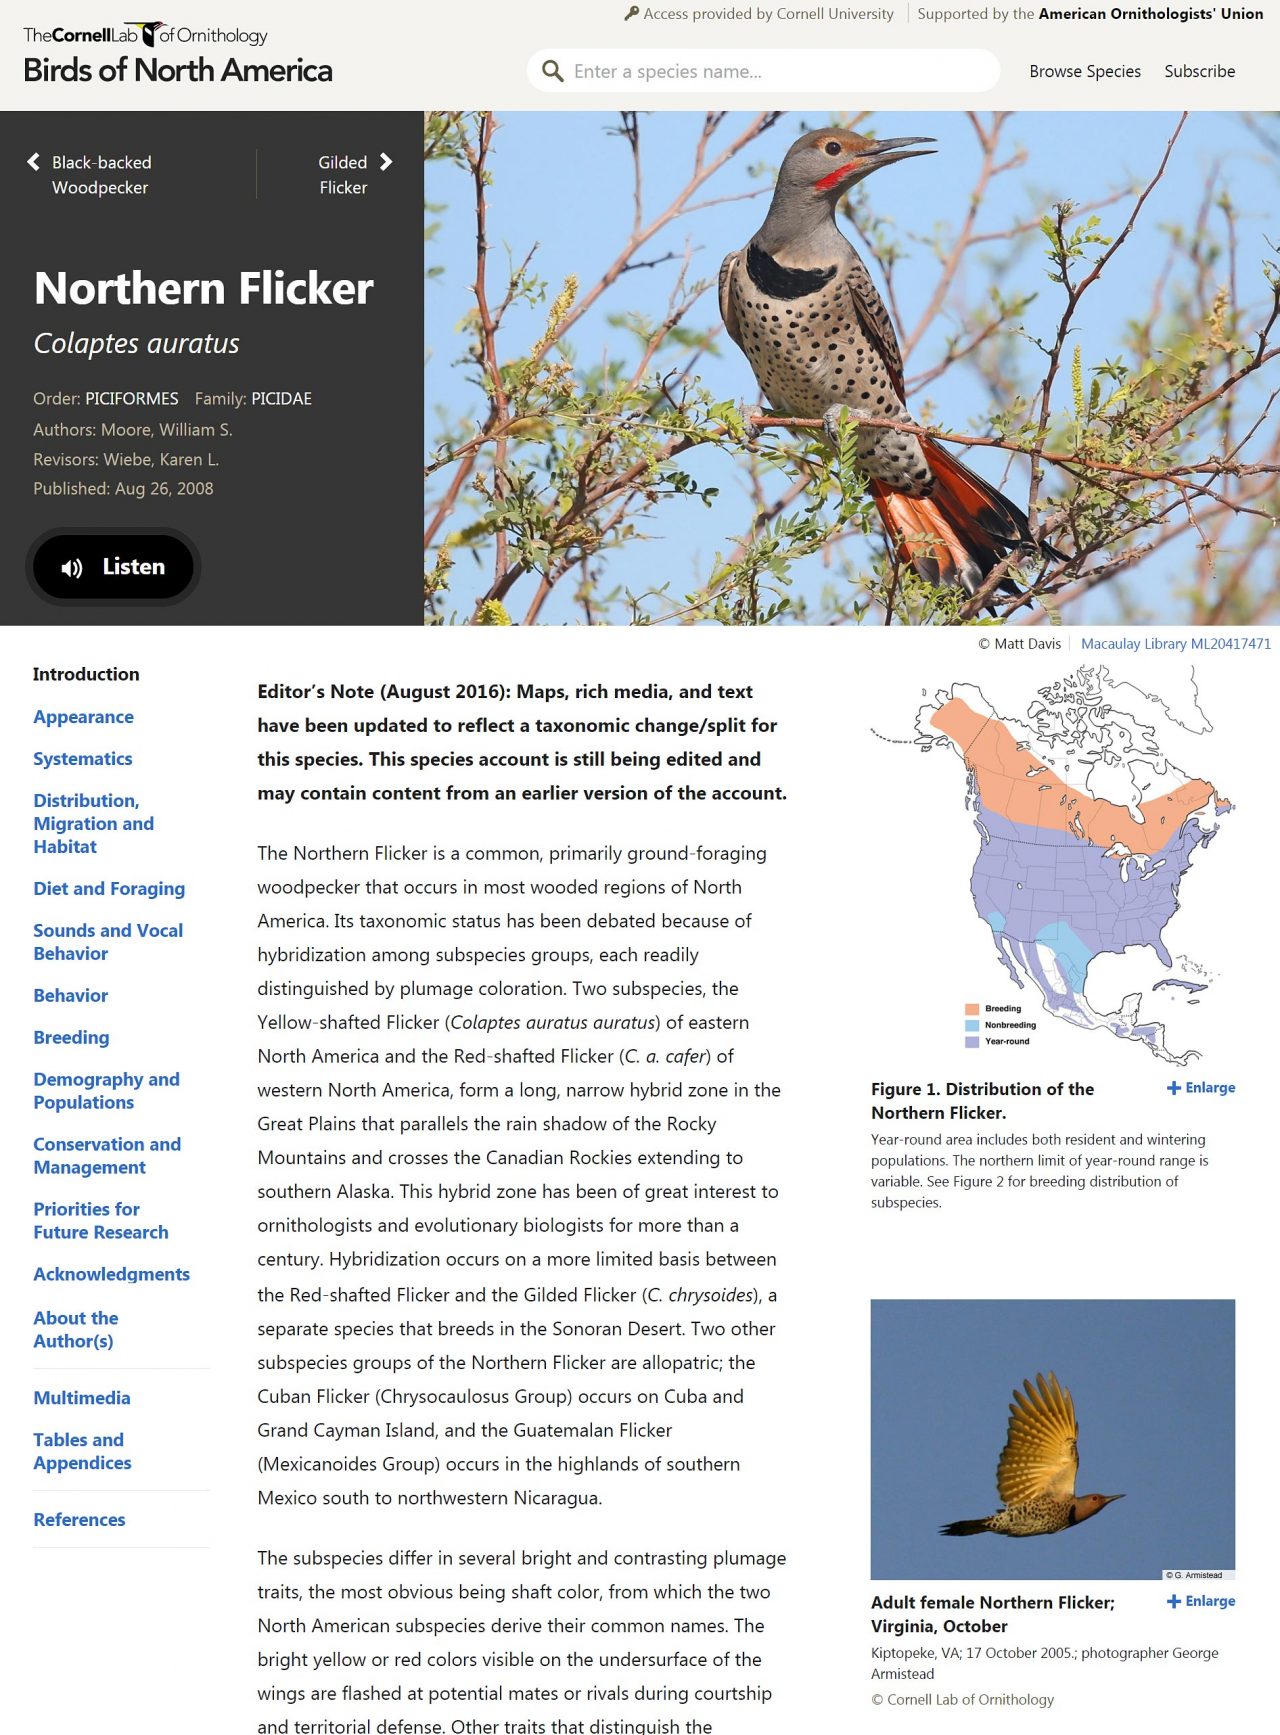 Northern Flicker is just one of the over 750 species of North American birds that you can read about on Birds of North America.